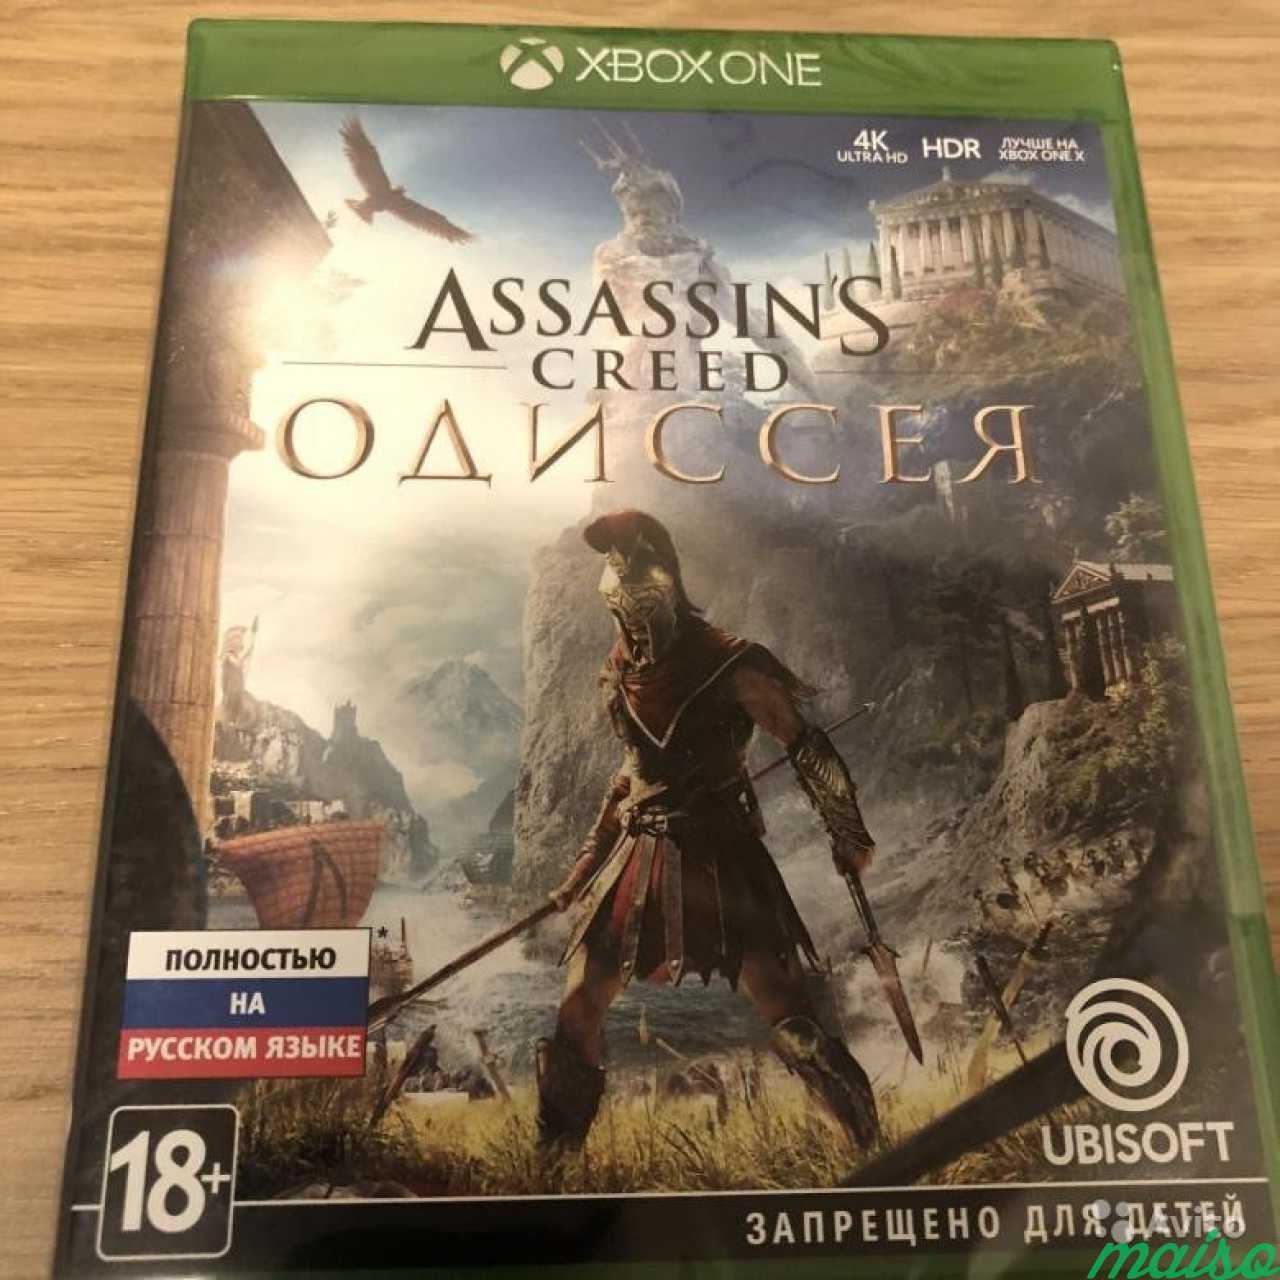 Assassin s xbox 360. Assassins Creed Одиссея Xbox one диск. Диск ассасин Крид Одиссея Xbox 360. Assassin's Creed на Odyssey на Xbox 360. Xbox one диск Assassins Creed.